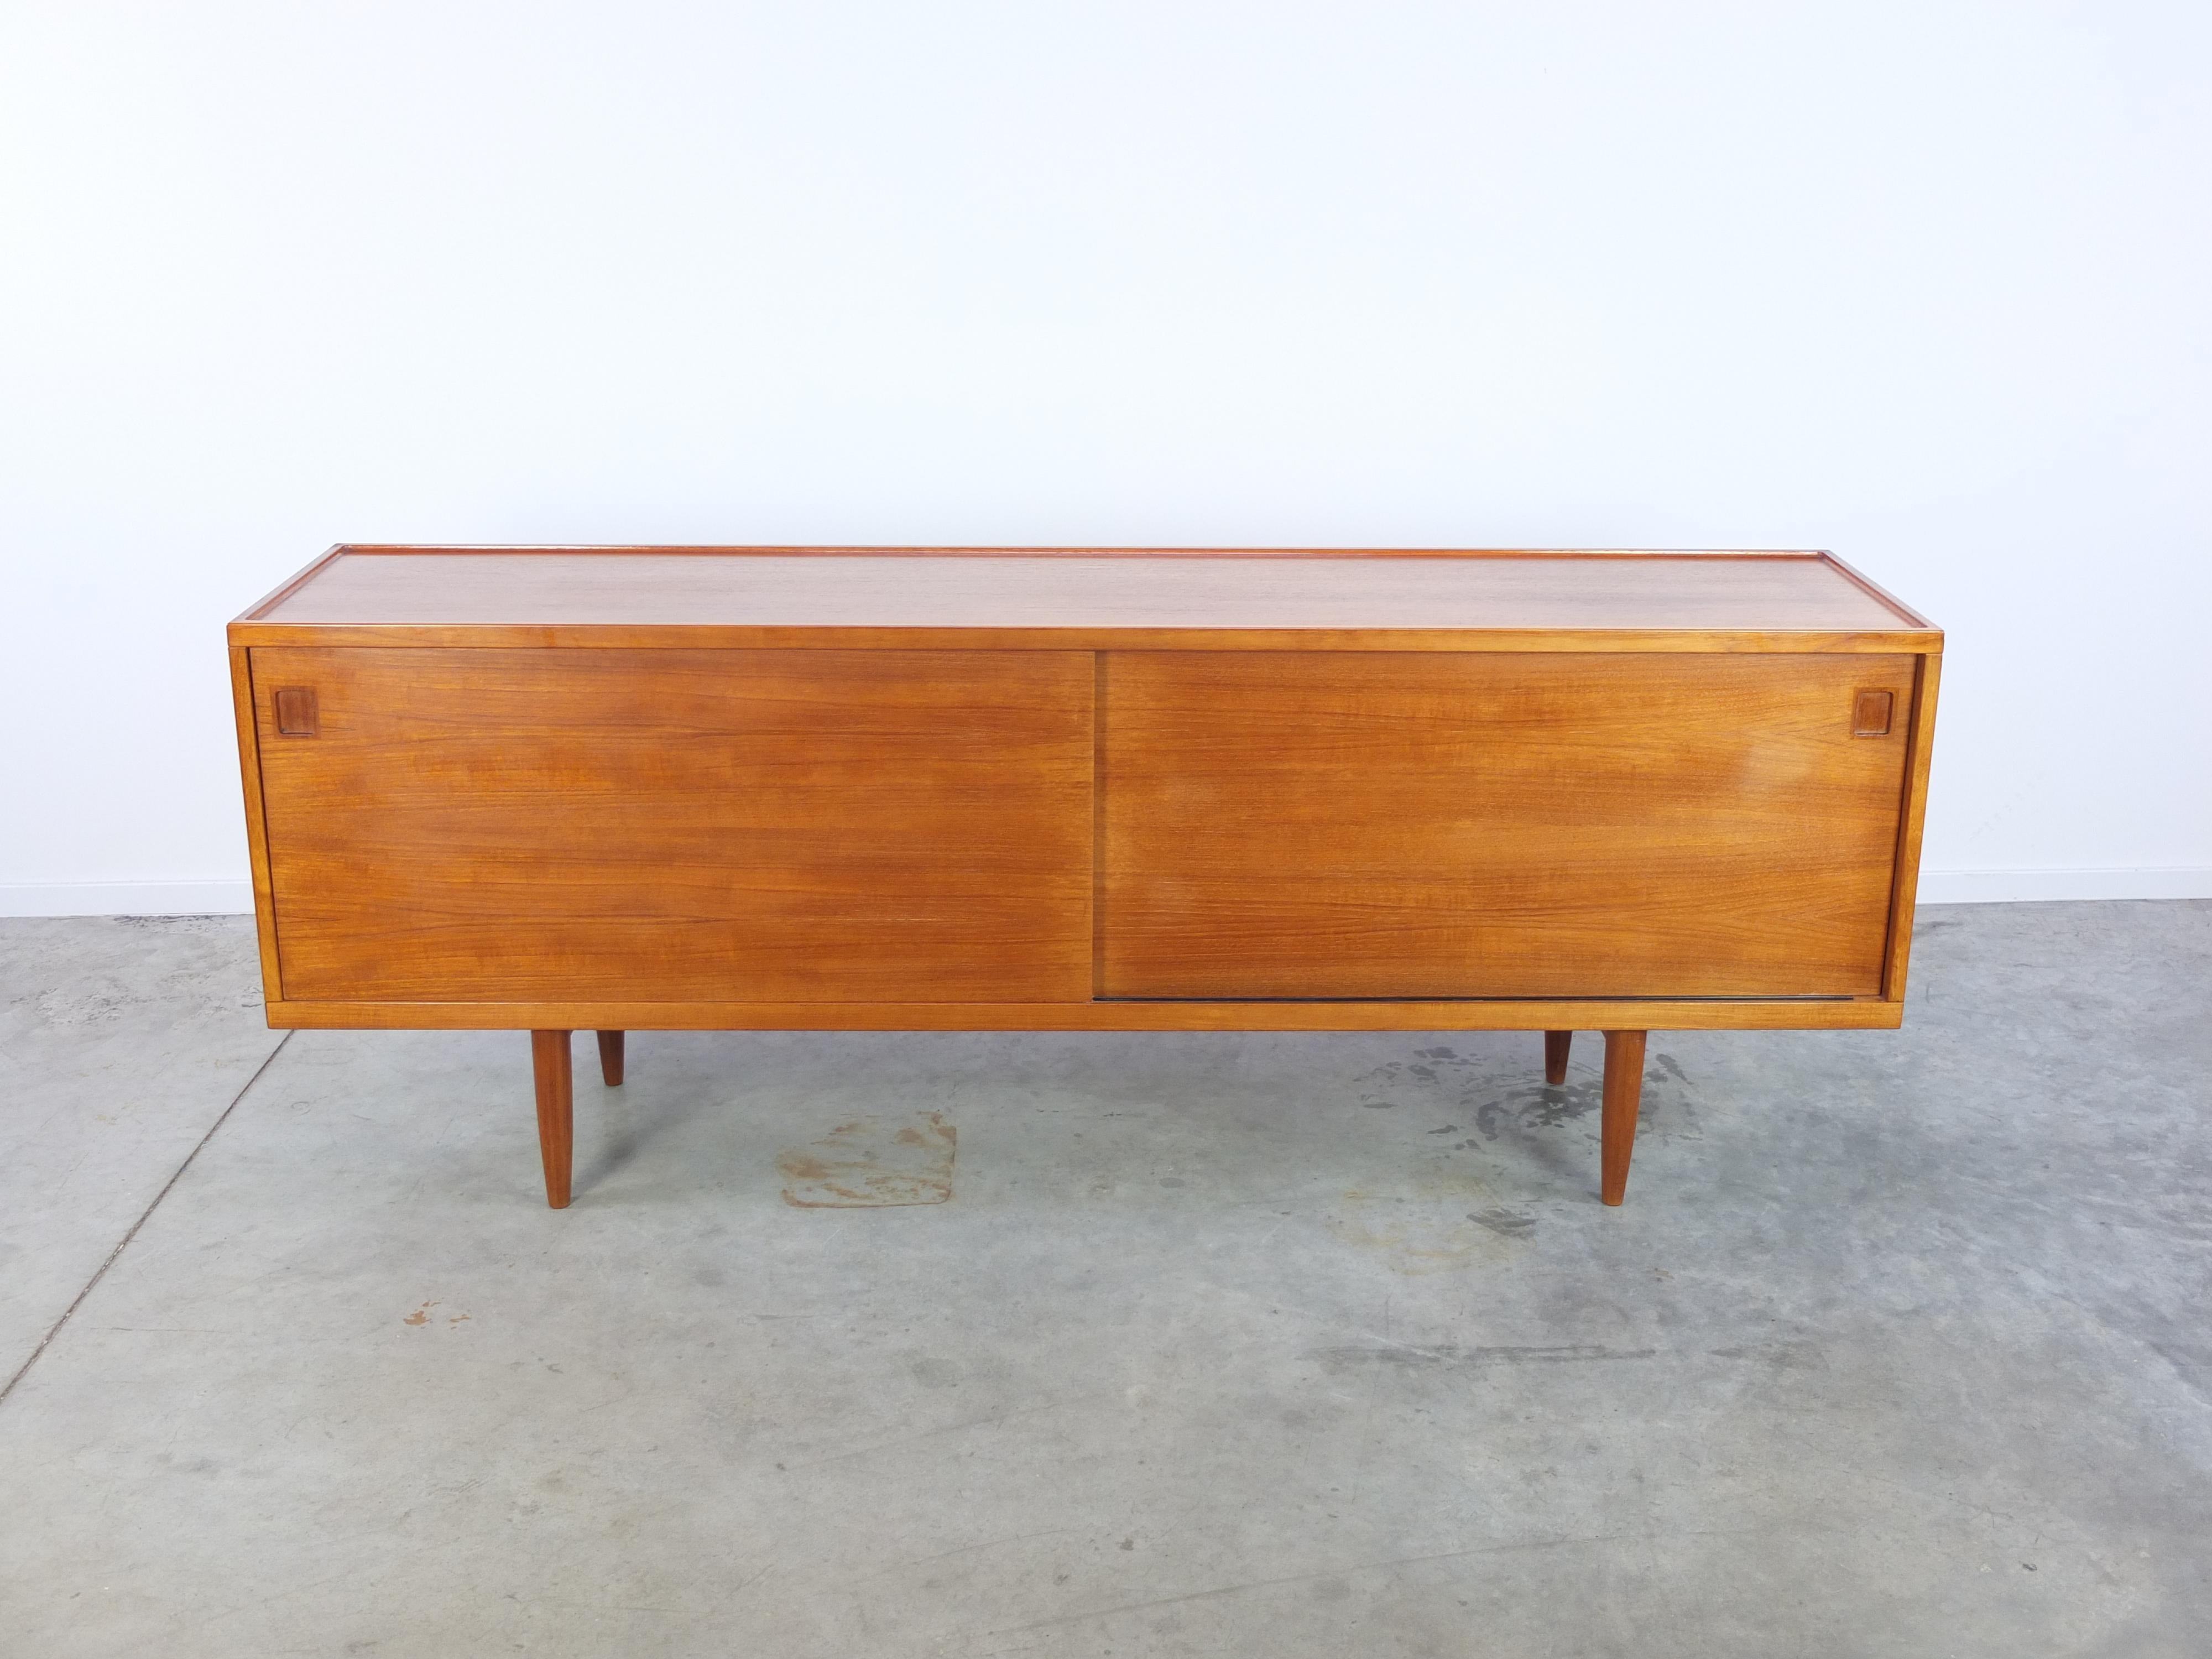 What a sideboard! This is ‘Model 20’ designed by Niels O. Møller in the 1950s. This model is quite renowned as a true Danish Modern classic and I can only agree. The proportions, details and high quality manufacturing all work together to make this